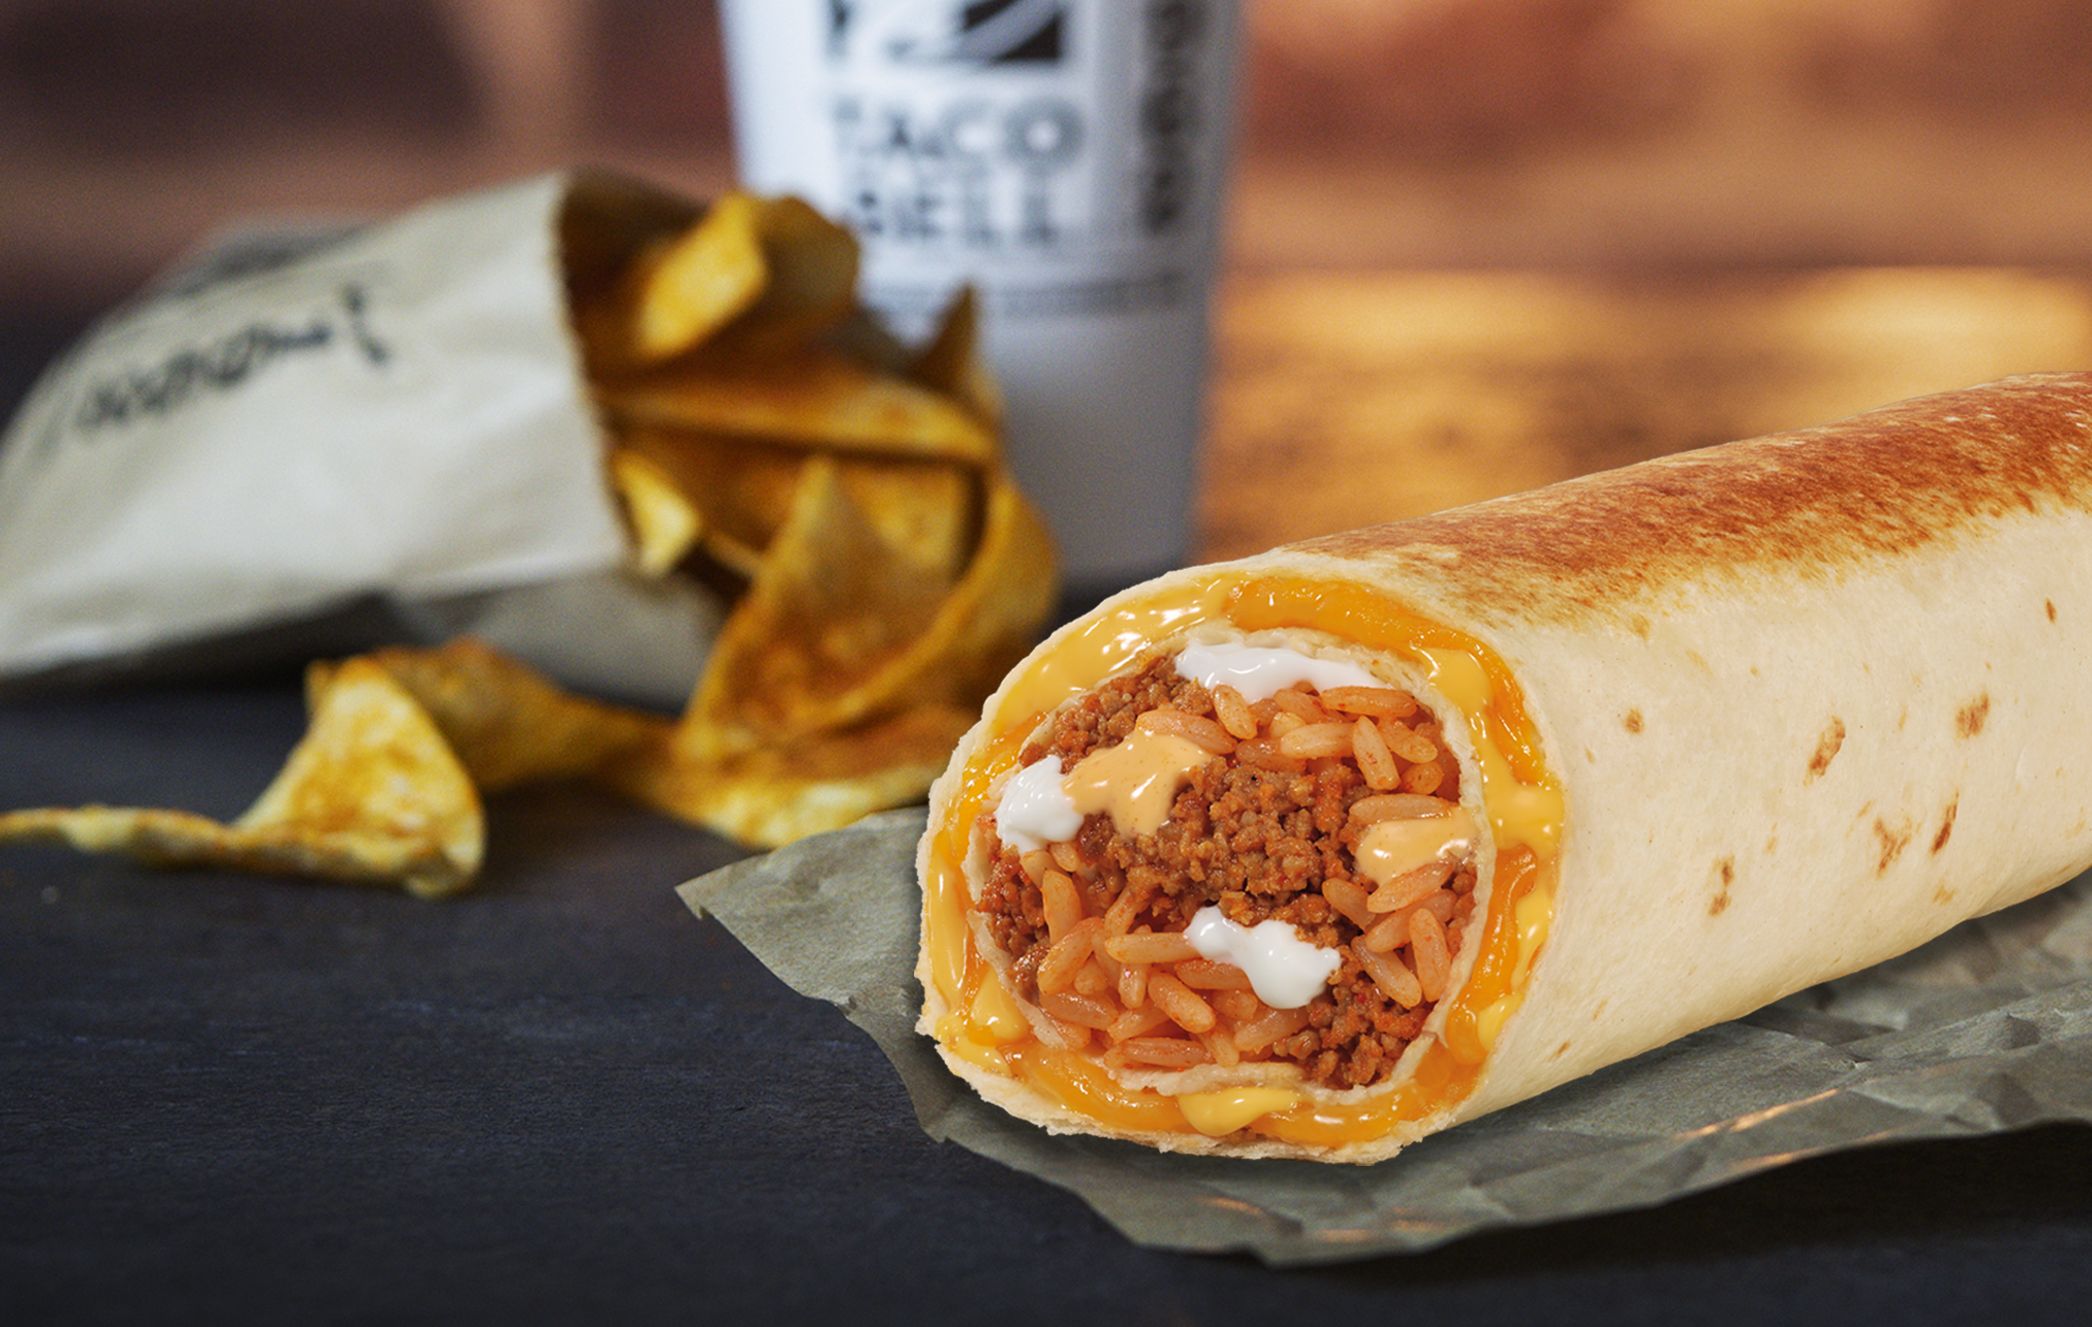 Taco Bell Offers the Quesarito and Black Bean Quesarito Exclusively with Online and In-app Orders for a Limited Time